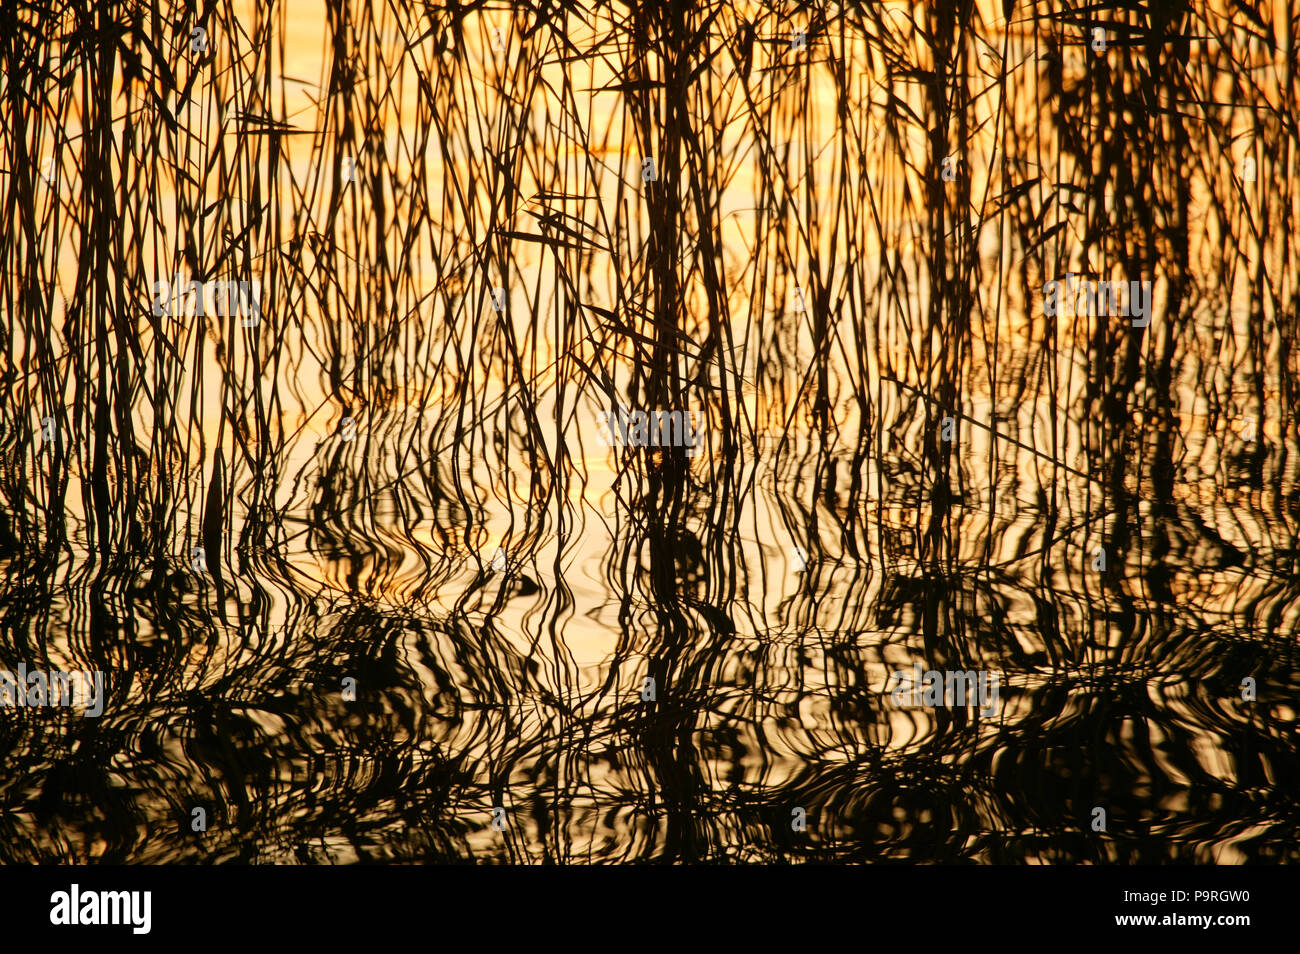 Reeds, Phragmites, and reflections at sunrise in the lake Vansjø, Østfold, Norway. Vansjø is a part of the water system called Morsavassdraget. Stock Photo